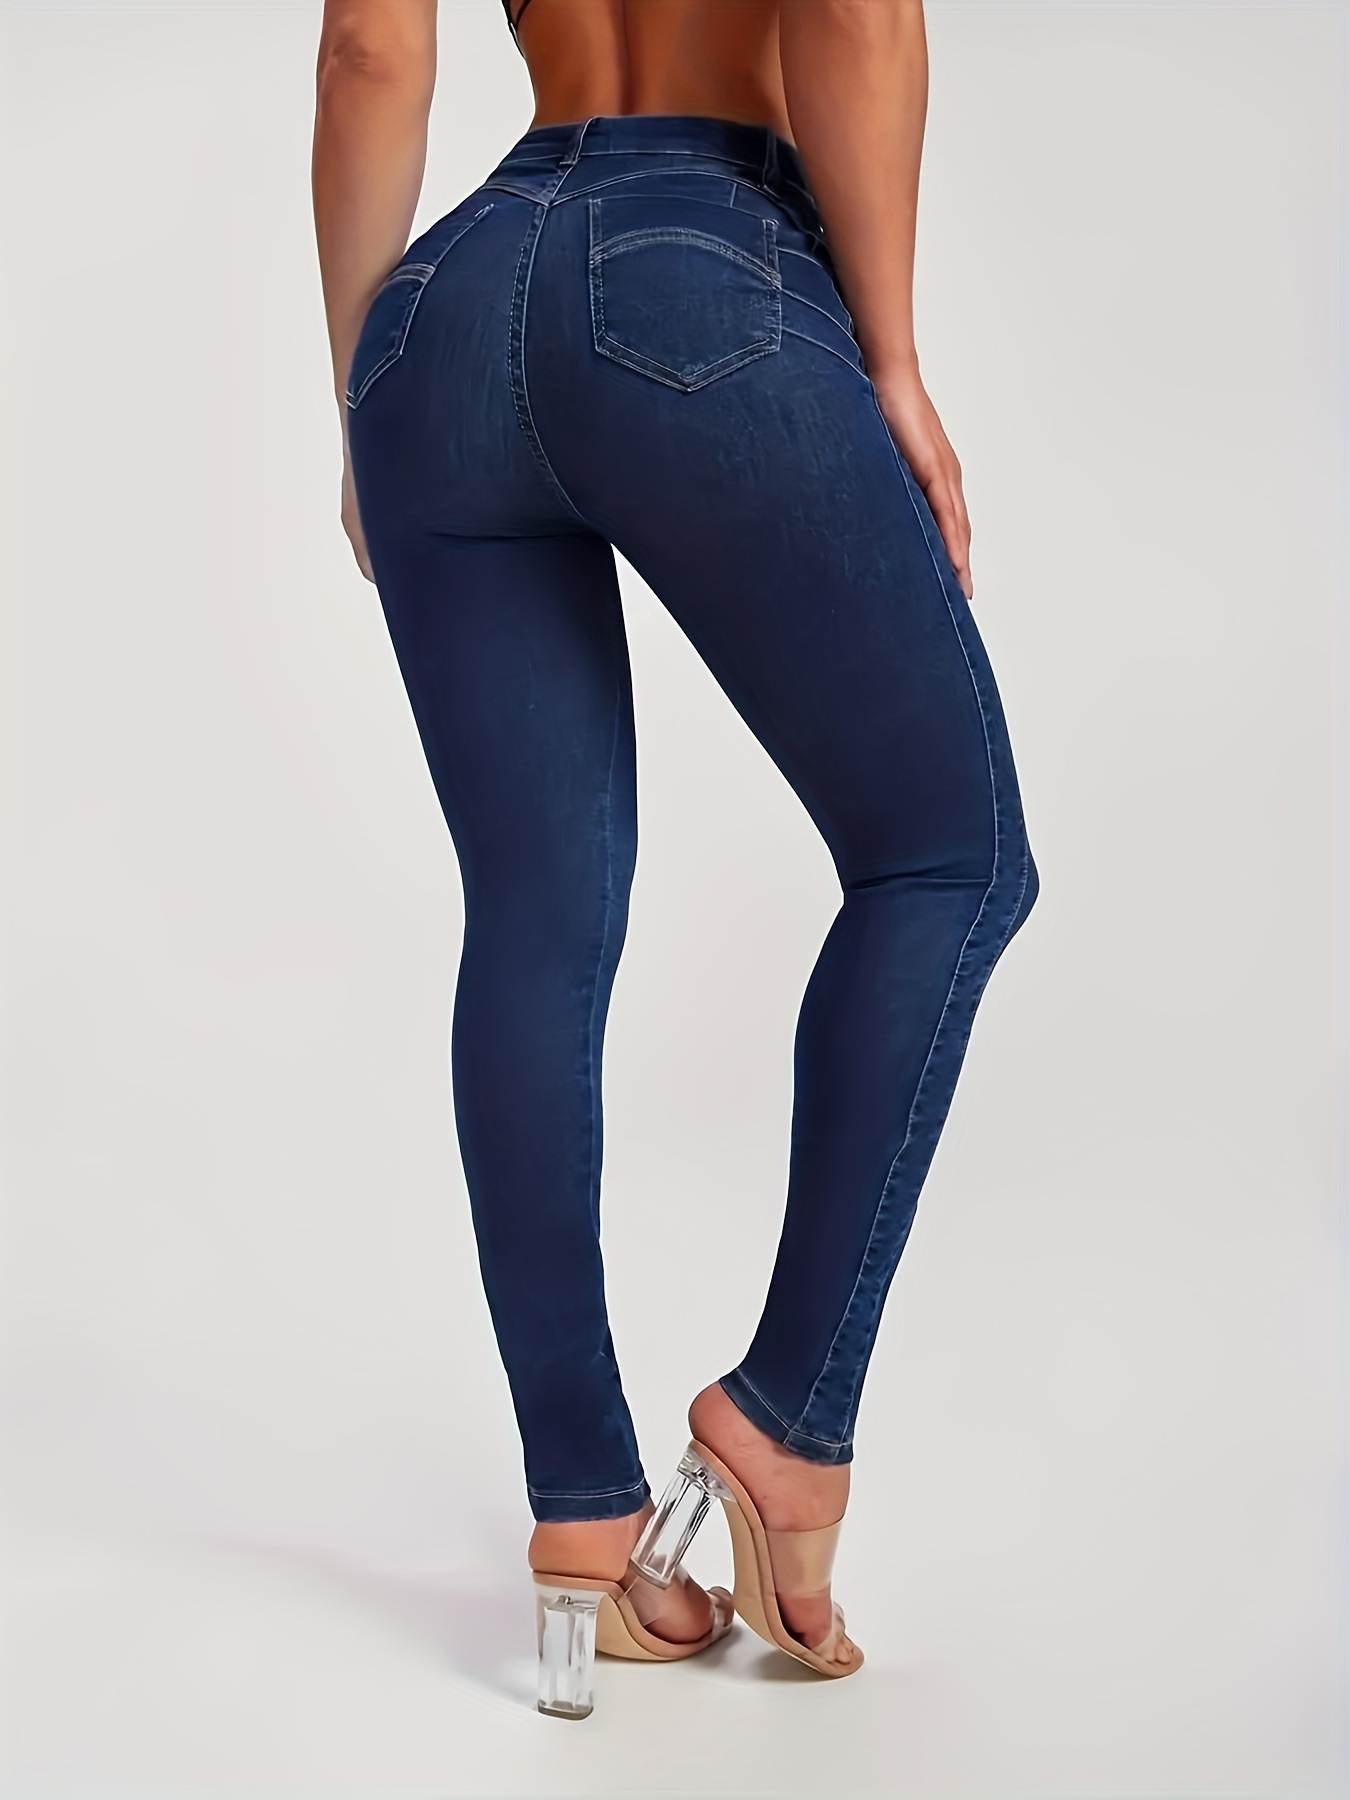 Summer Shiny Sexy Tight Fitting Pants Women Fashion High Waist Butt Lift Tight  Pants - The Little Connection